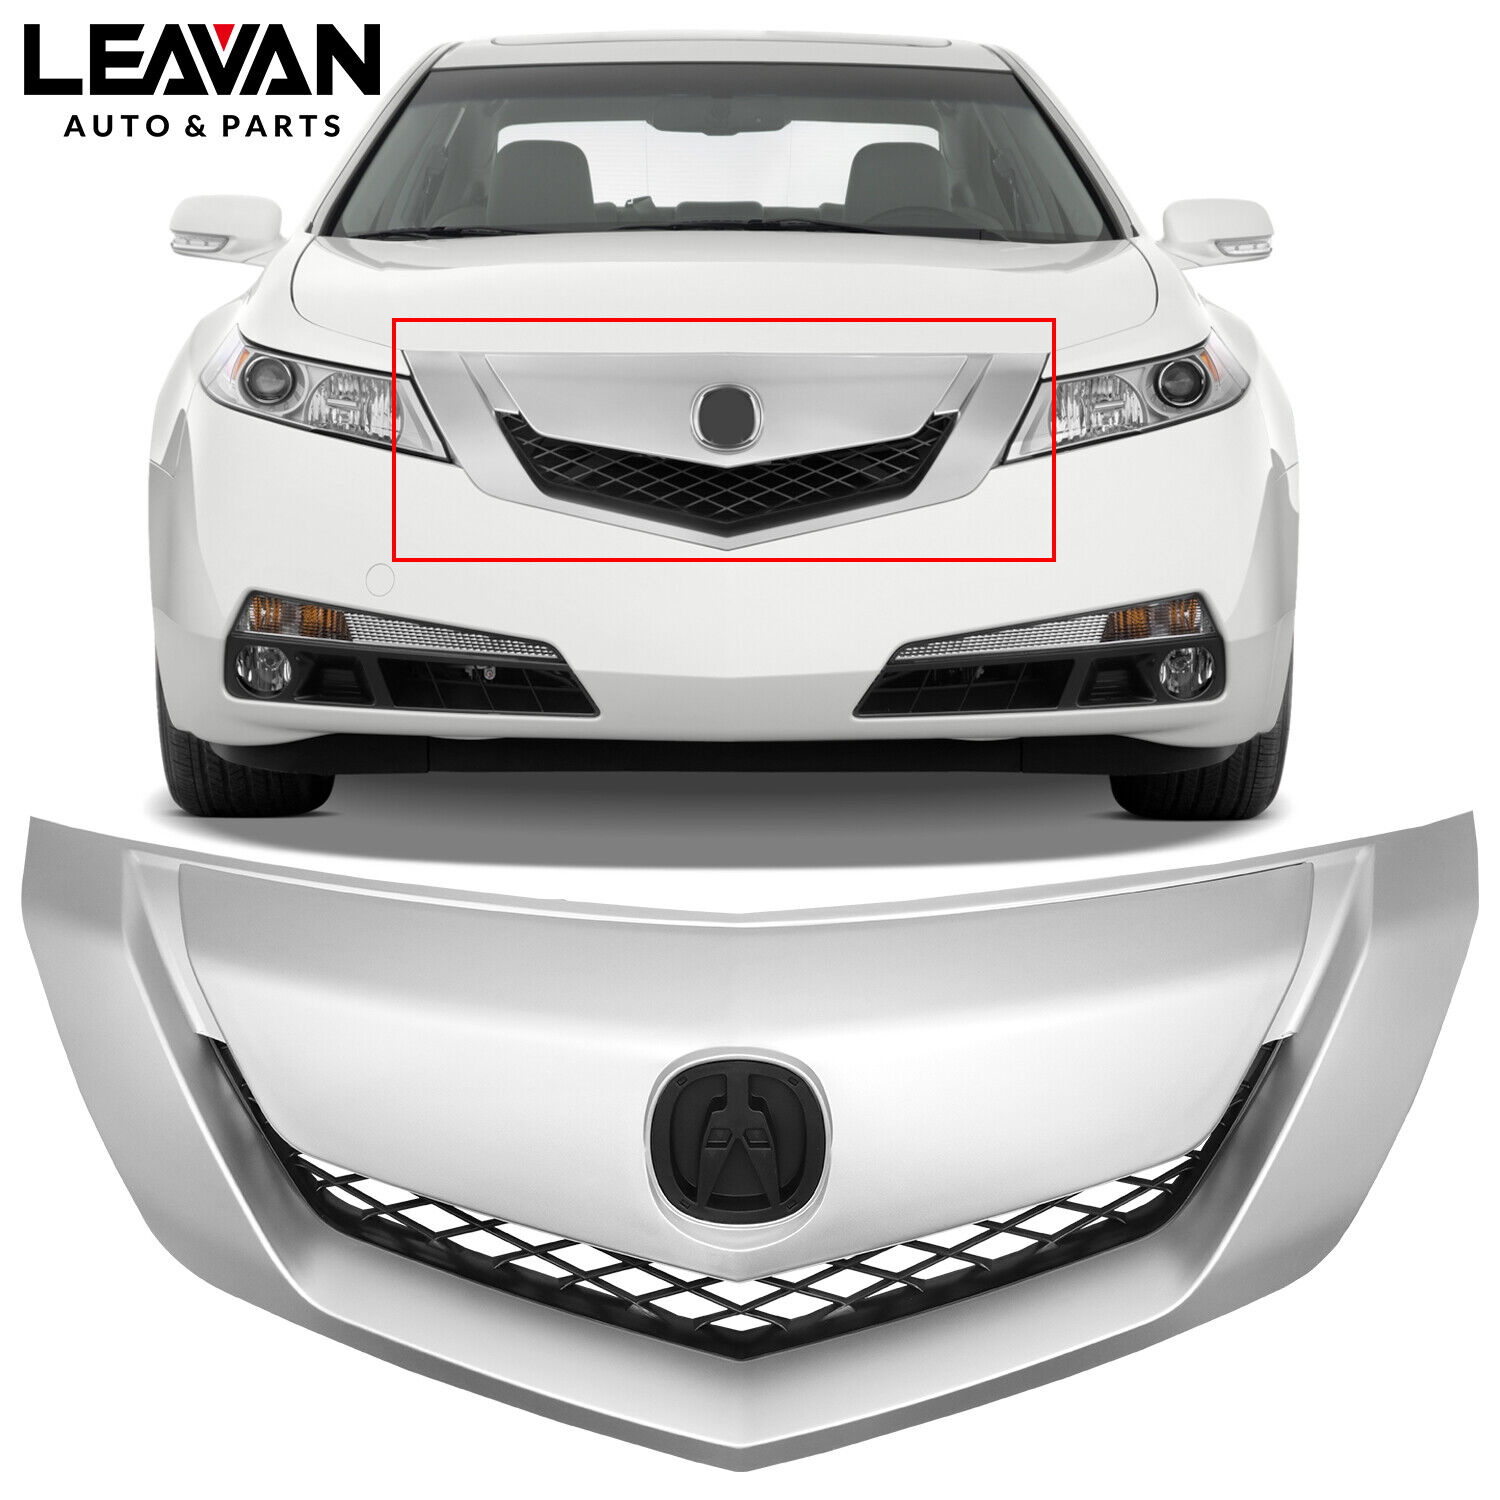 Fits For 2009 2010 2011 Acura TL Grille Chrome Front Bumper Upper Grill